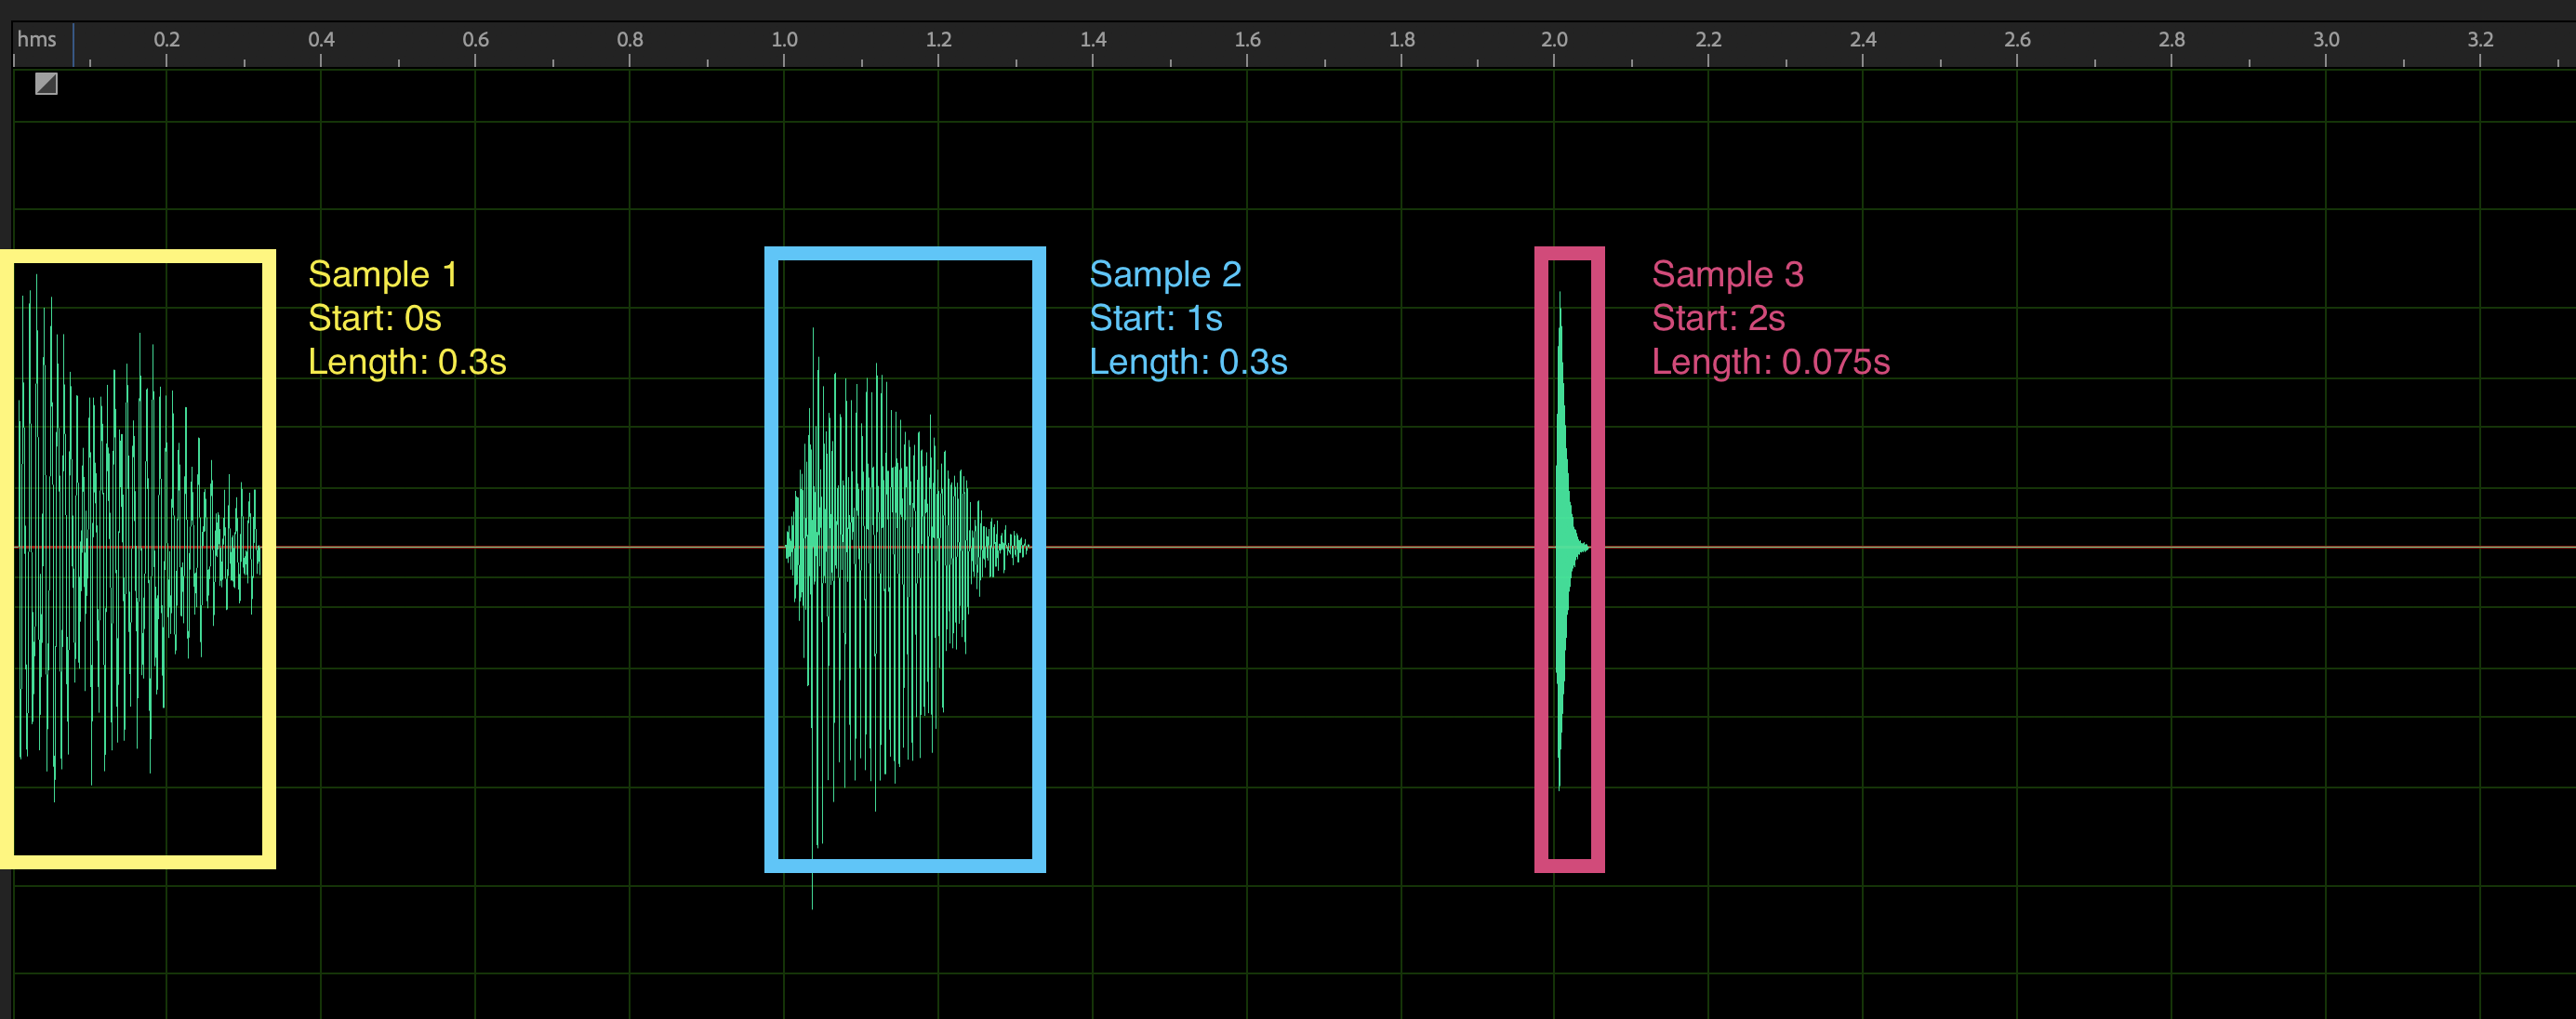 Waveform visualization showing how each sprite occupies a chunk of time, and is labeled by its start time and duration